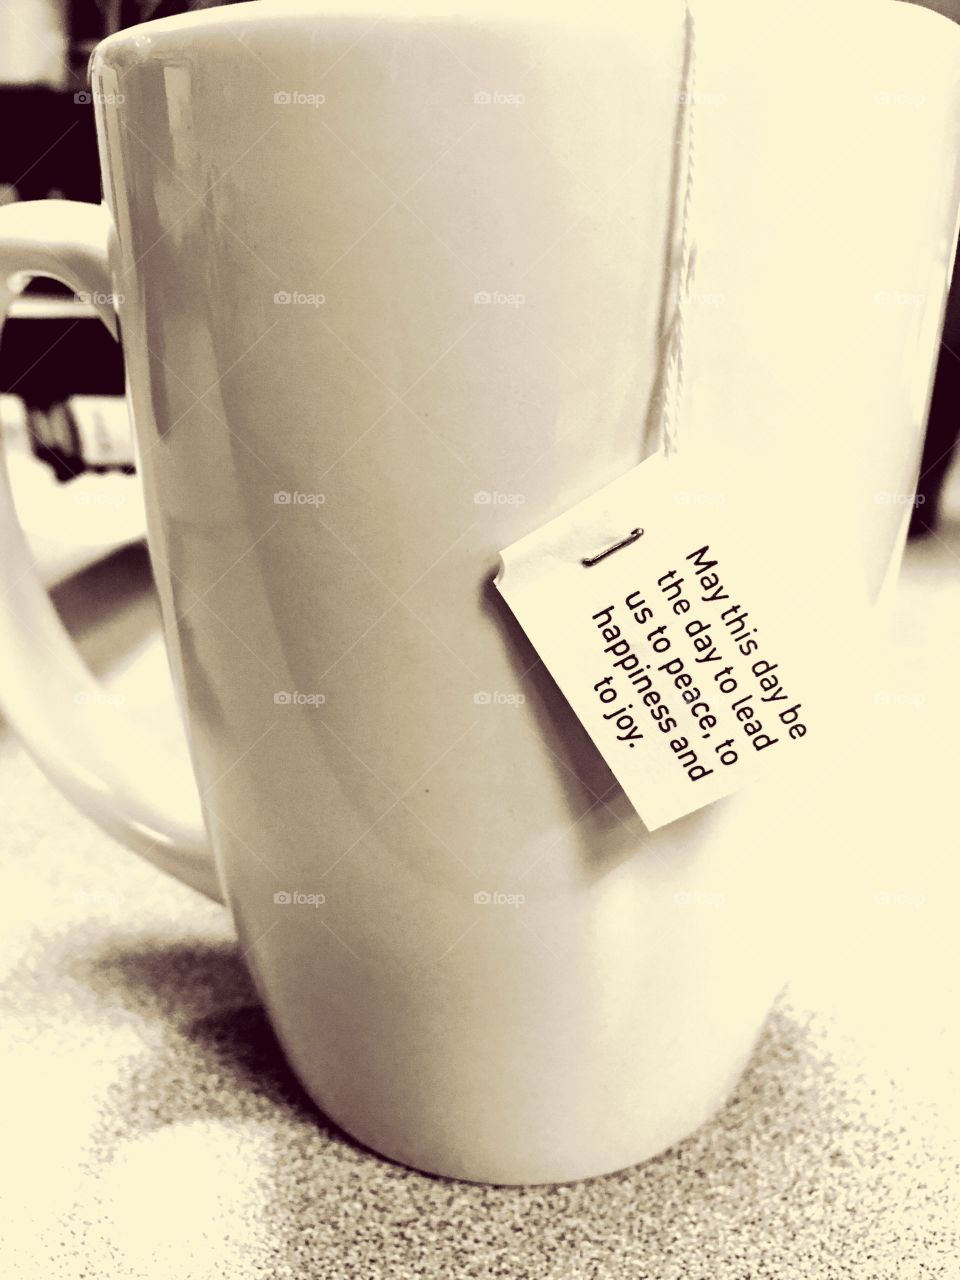 Food for thought this morning with Yogi tea